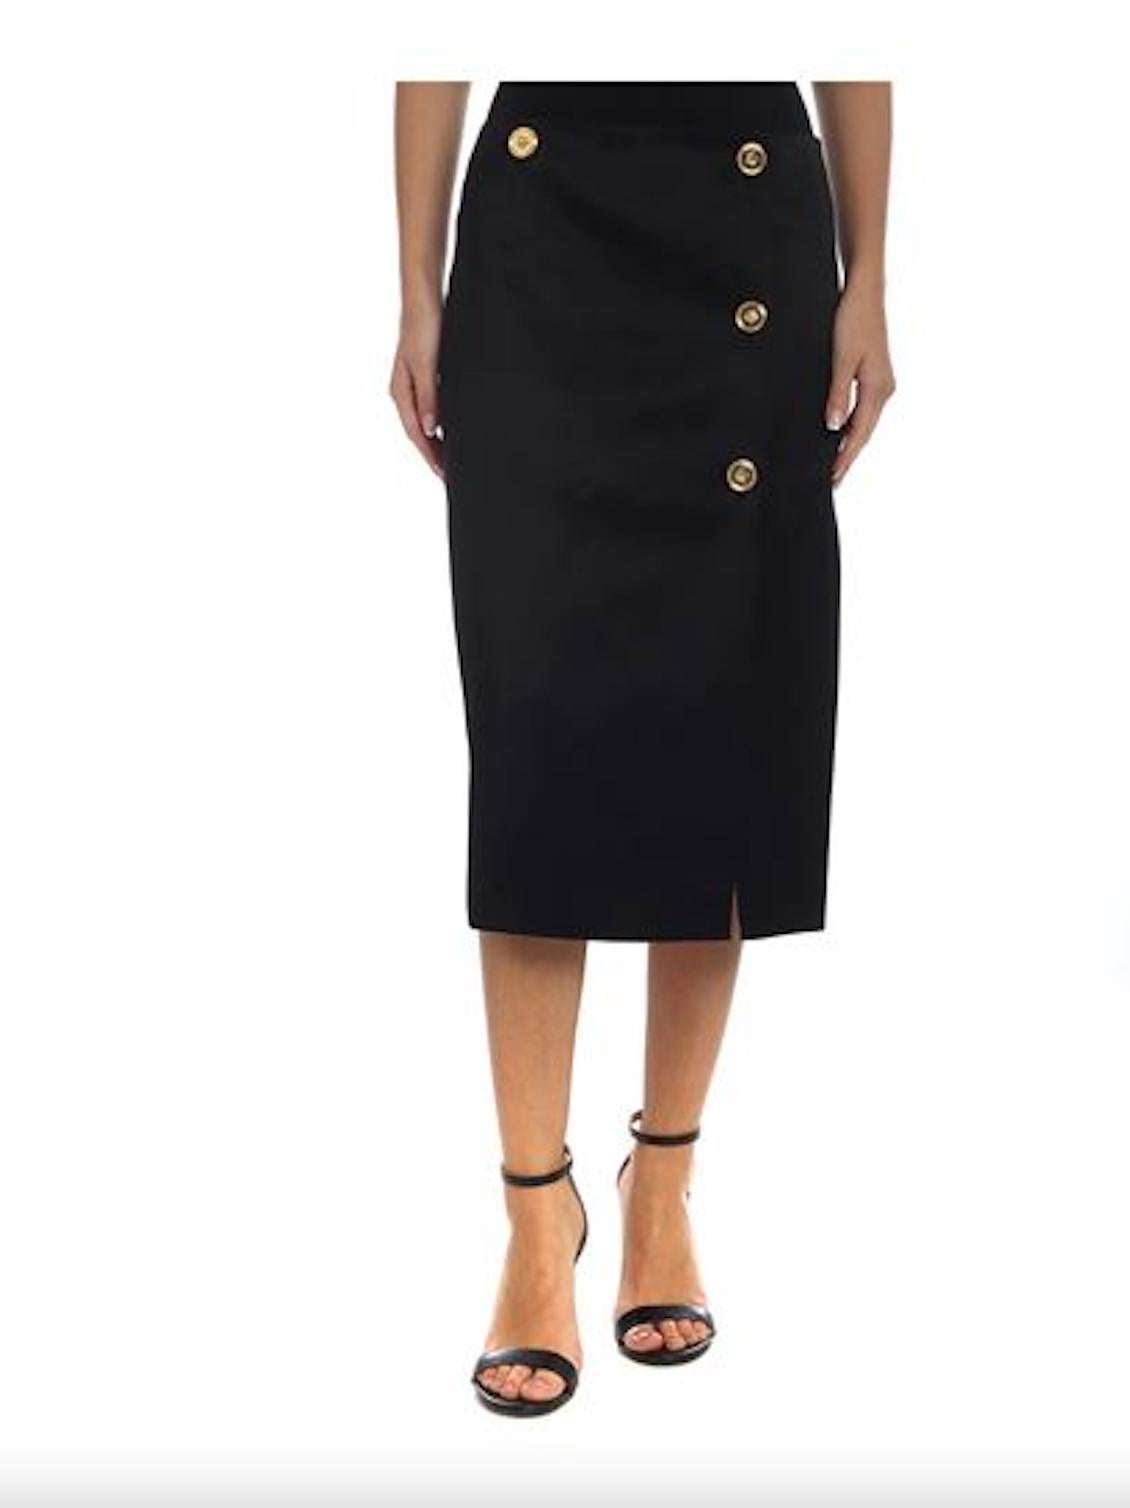 Versace Black Knee Length Pencil Skirt with Gold-Tone Medusa Buttons

Versace's FW19 collection showcased silhouettes imbued with iconic house codes, as seen in this knee-length medusa detail pencil skirt. This pencil silhouette is hallmarked by